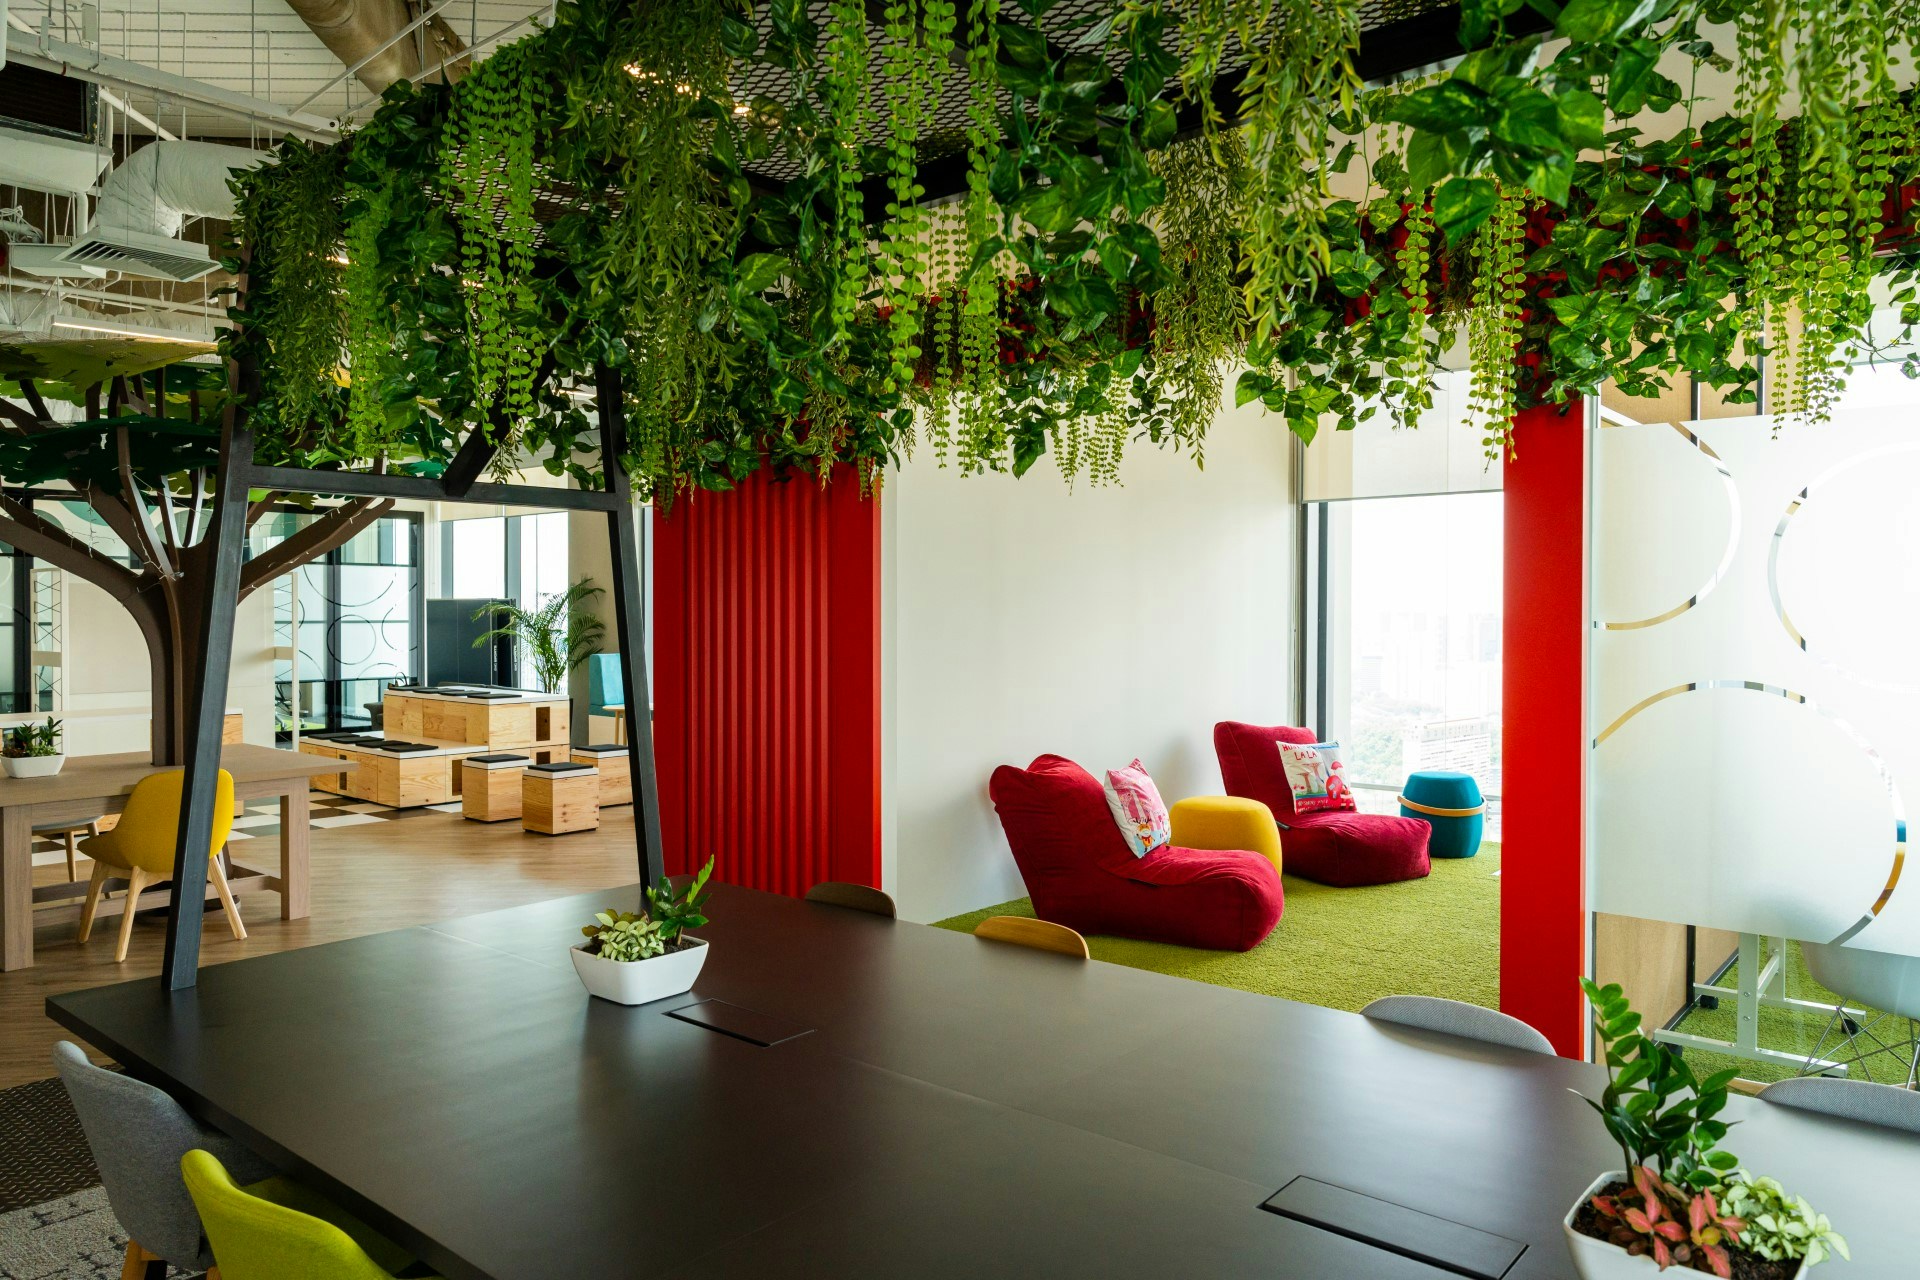 Relaxation Area with Hanging Plants